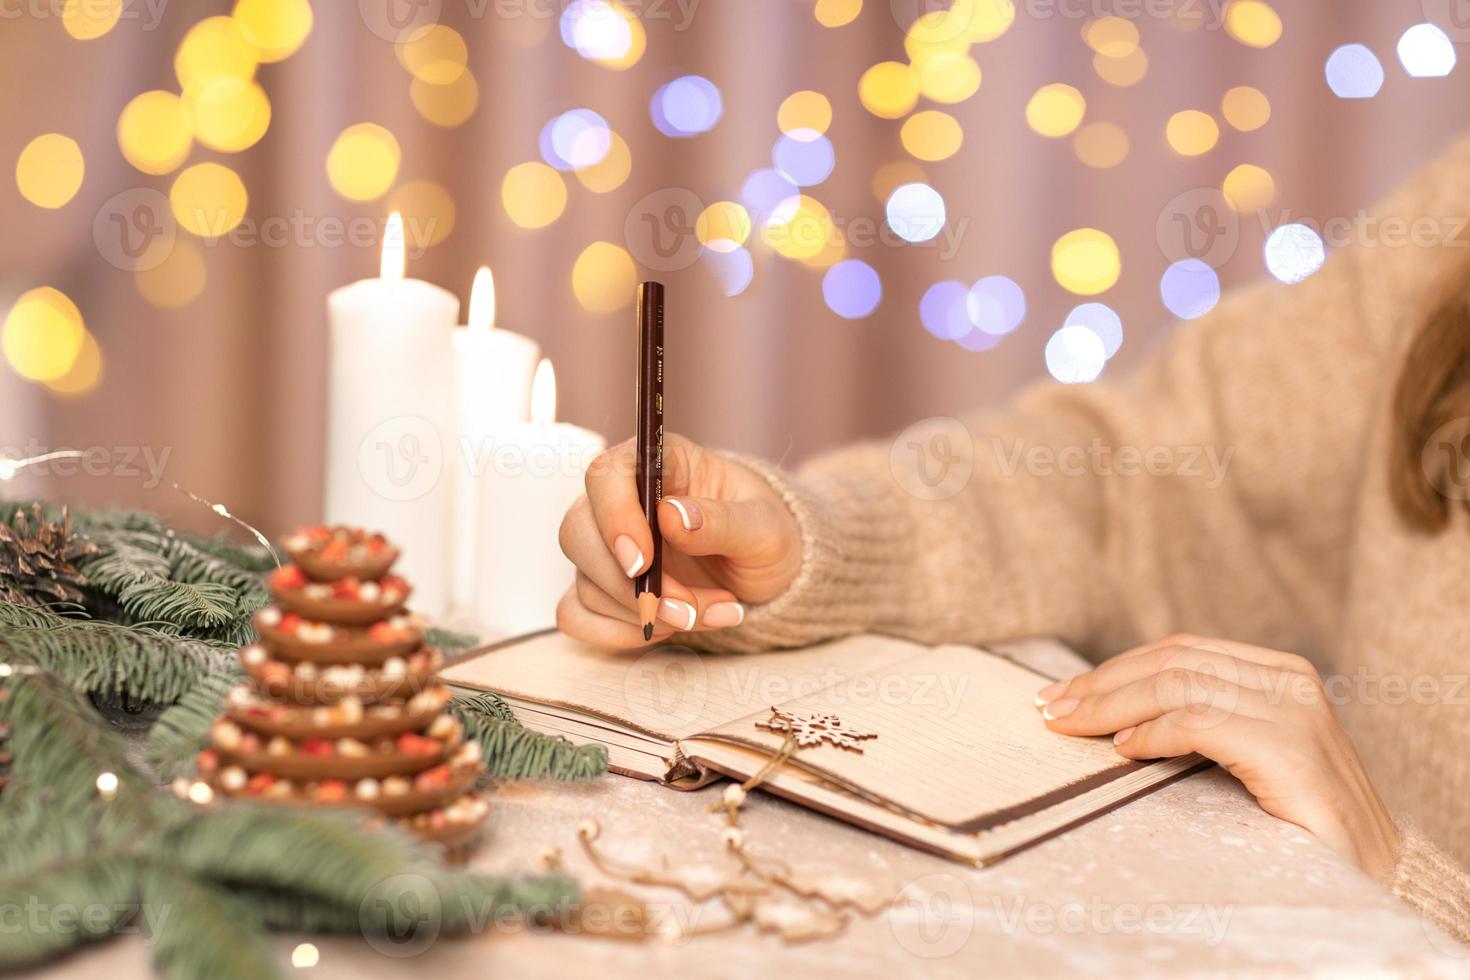 Wish list for new year christmas concept writing in notebook.Woman hands holding pen. Goals plans. Beige color background. Plan for next year photo